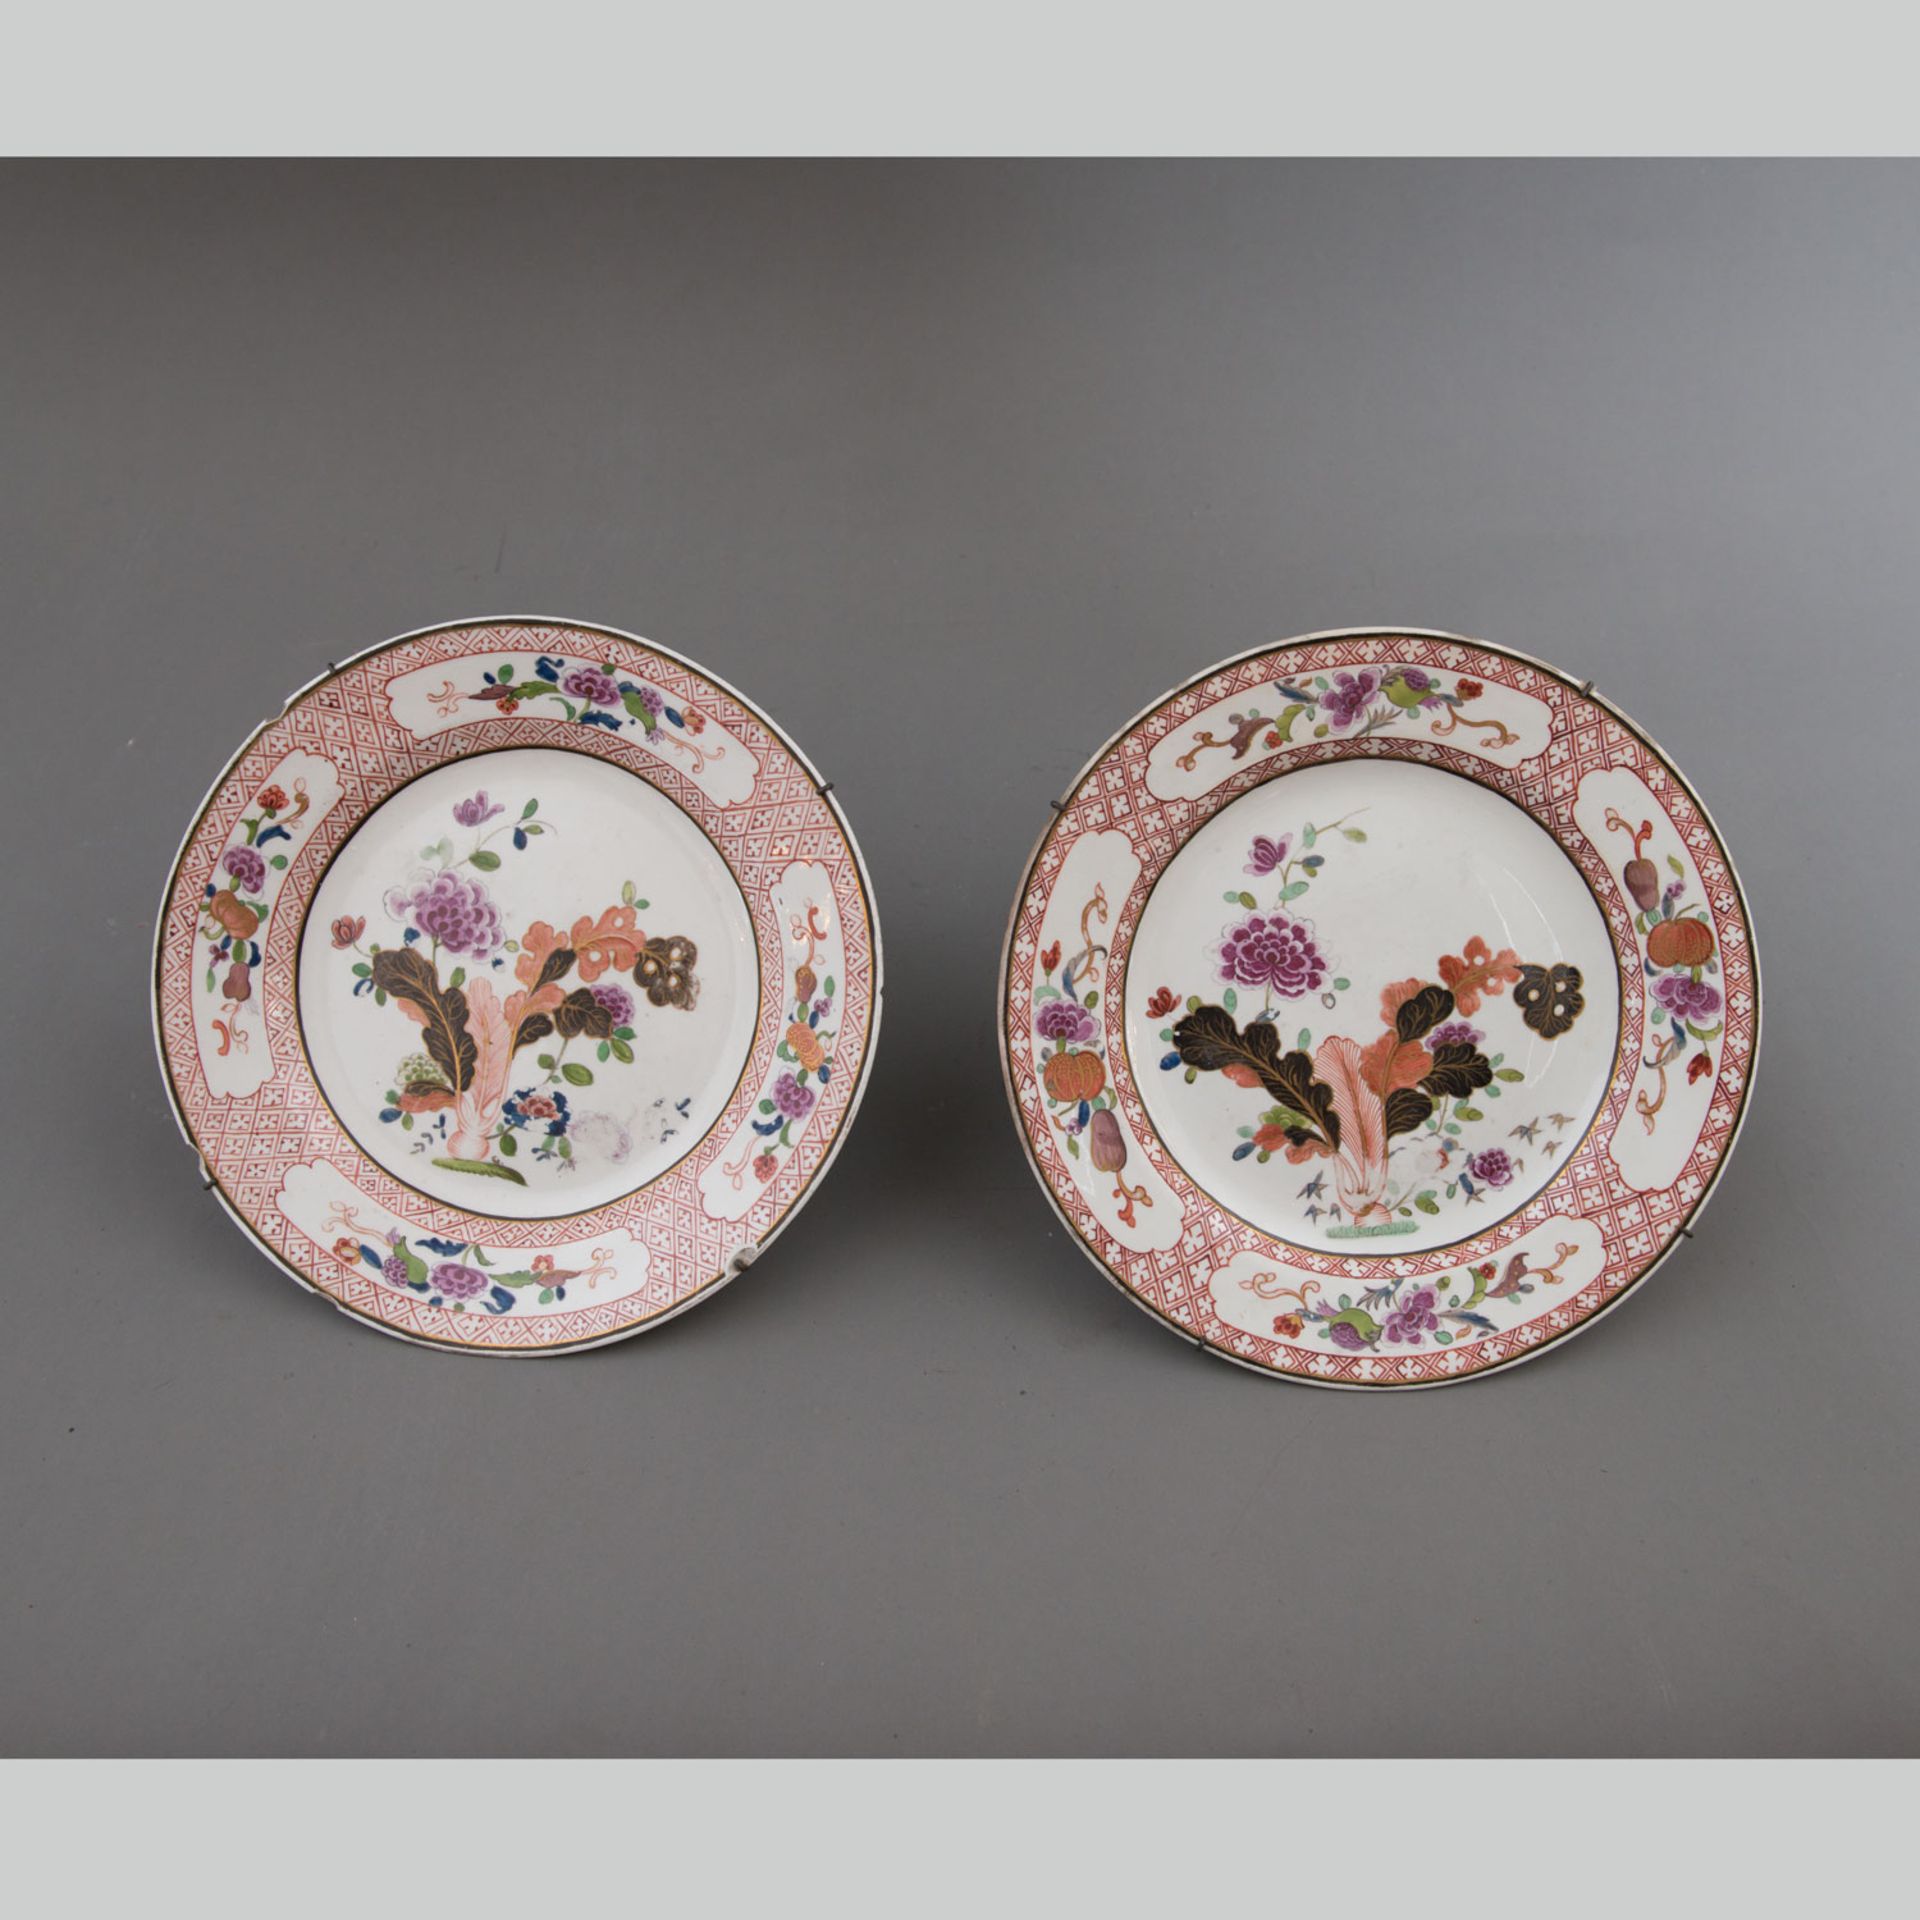 Pair of Vienna porcelain dishes